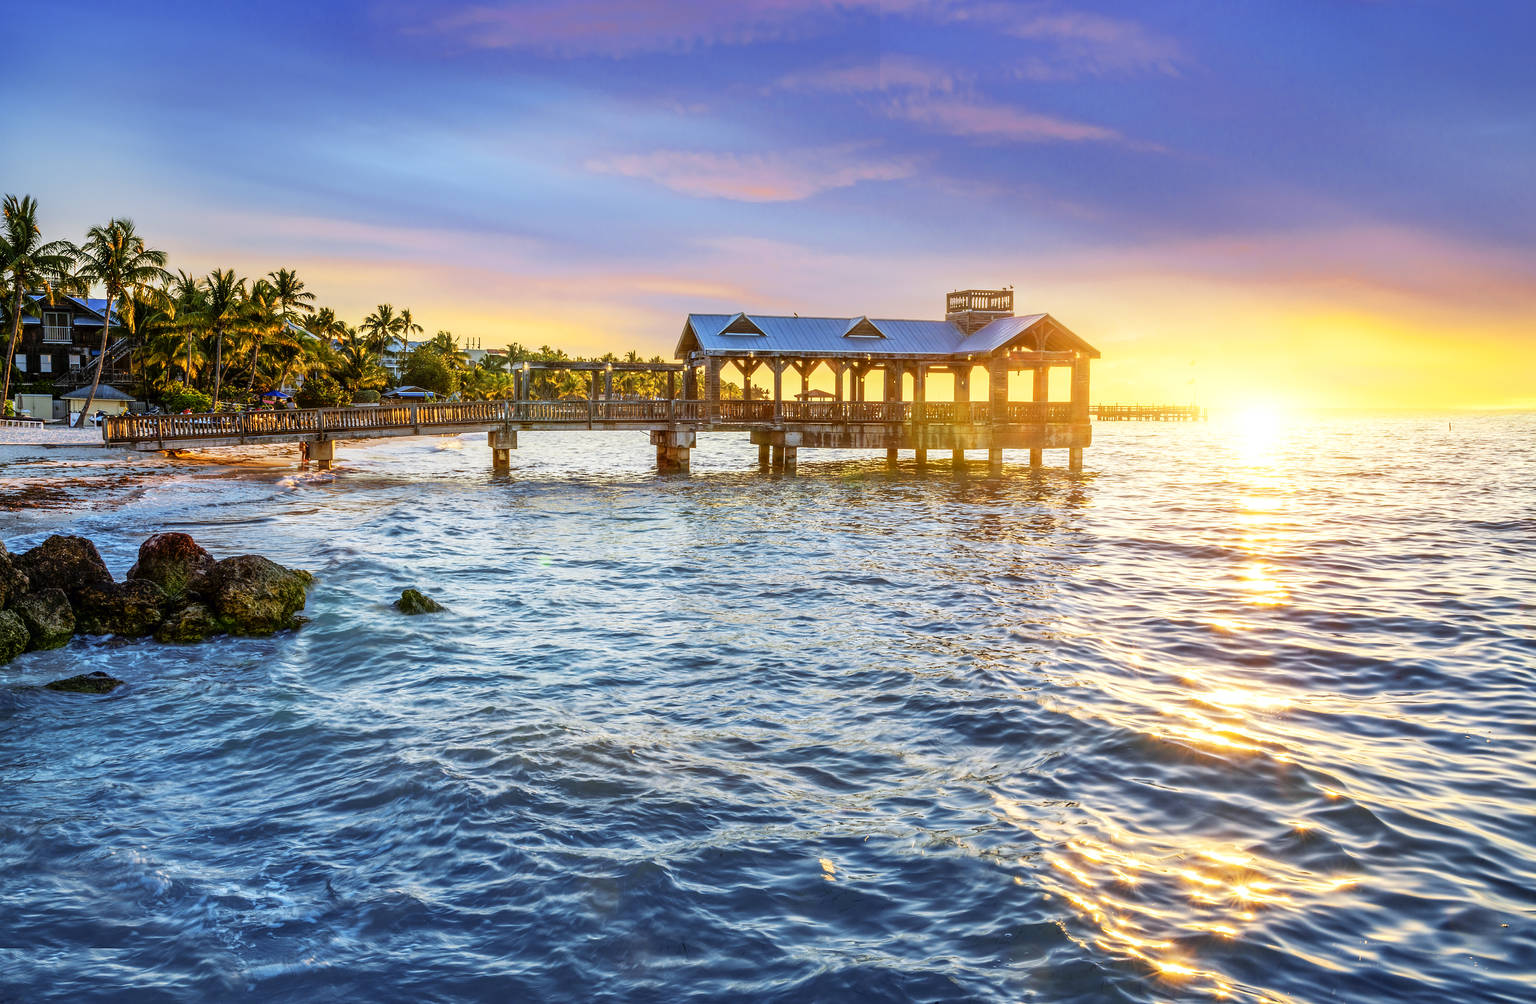 Key West, Florida Vacation Rentals: Condos, Beach Houses, Classic Cottages, & More